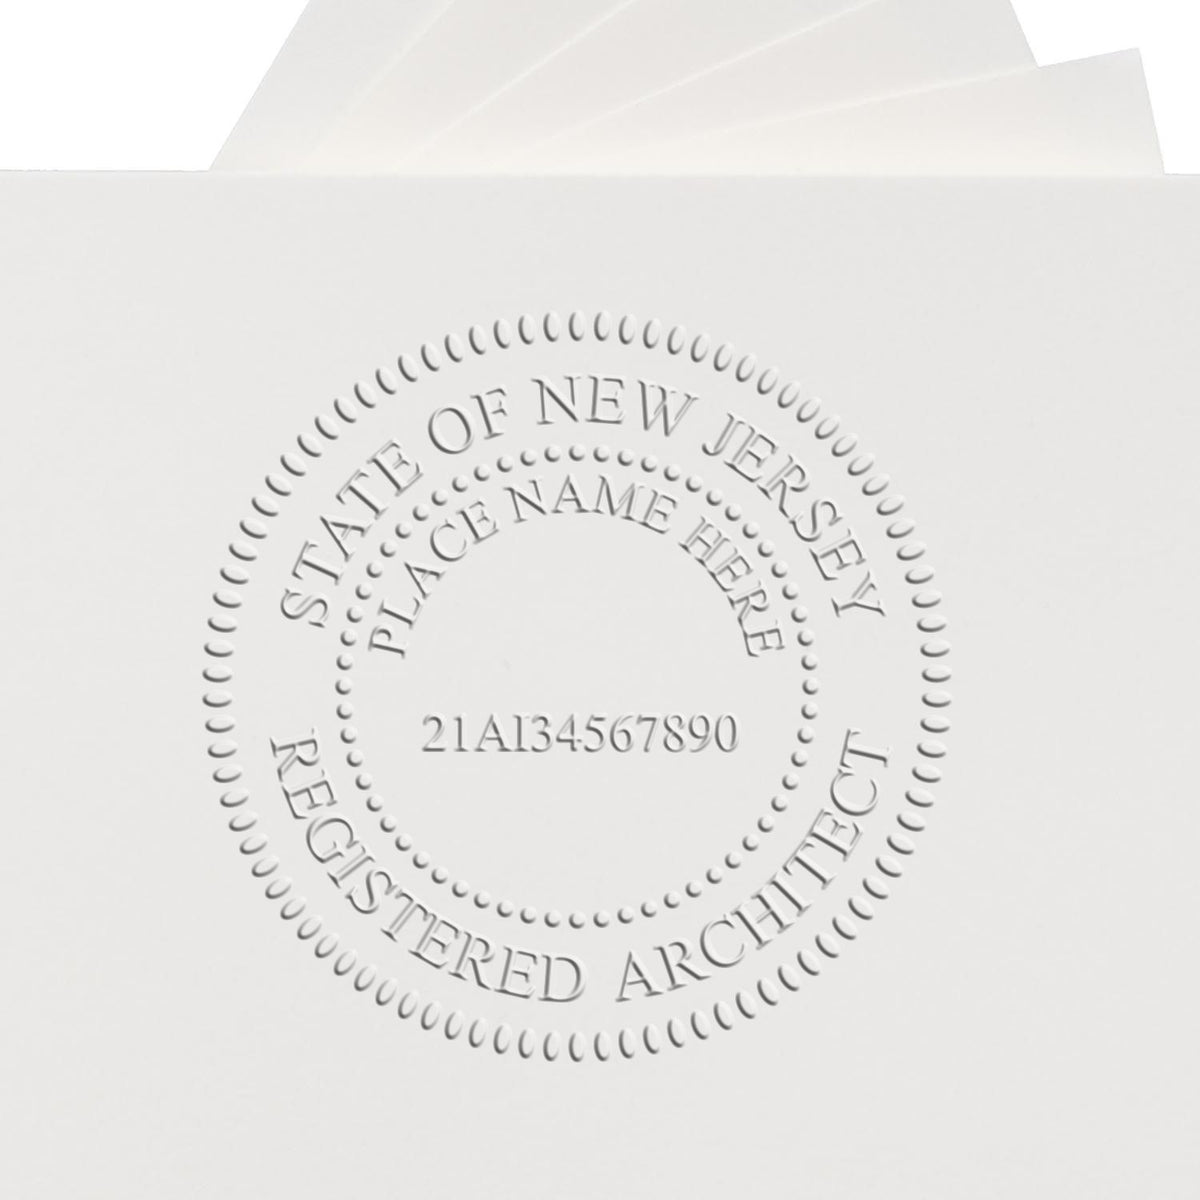 An in use photo of the Hybrid New Jersey Architect Seal showing a sample imprint on a cardstock